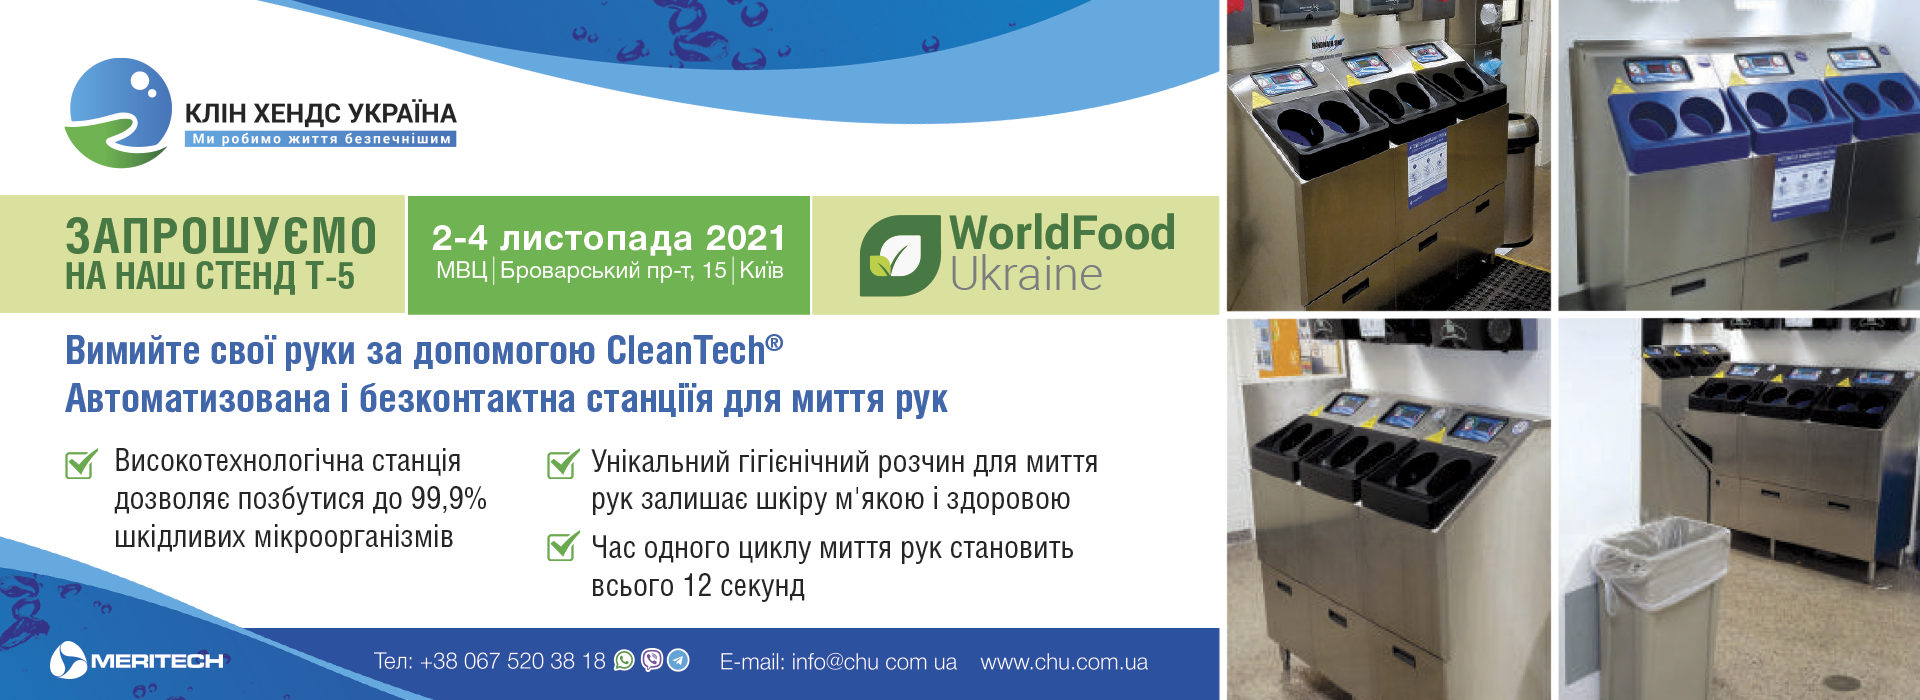 We Invite You to Visit Our Stand (Т-5) at the WorldFood Ukraine 2021 Exhibition